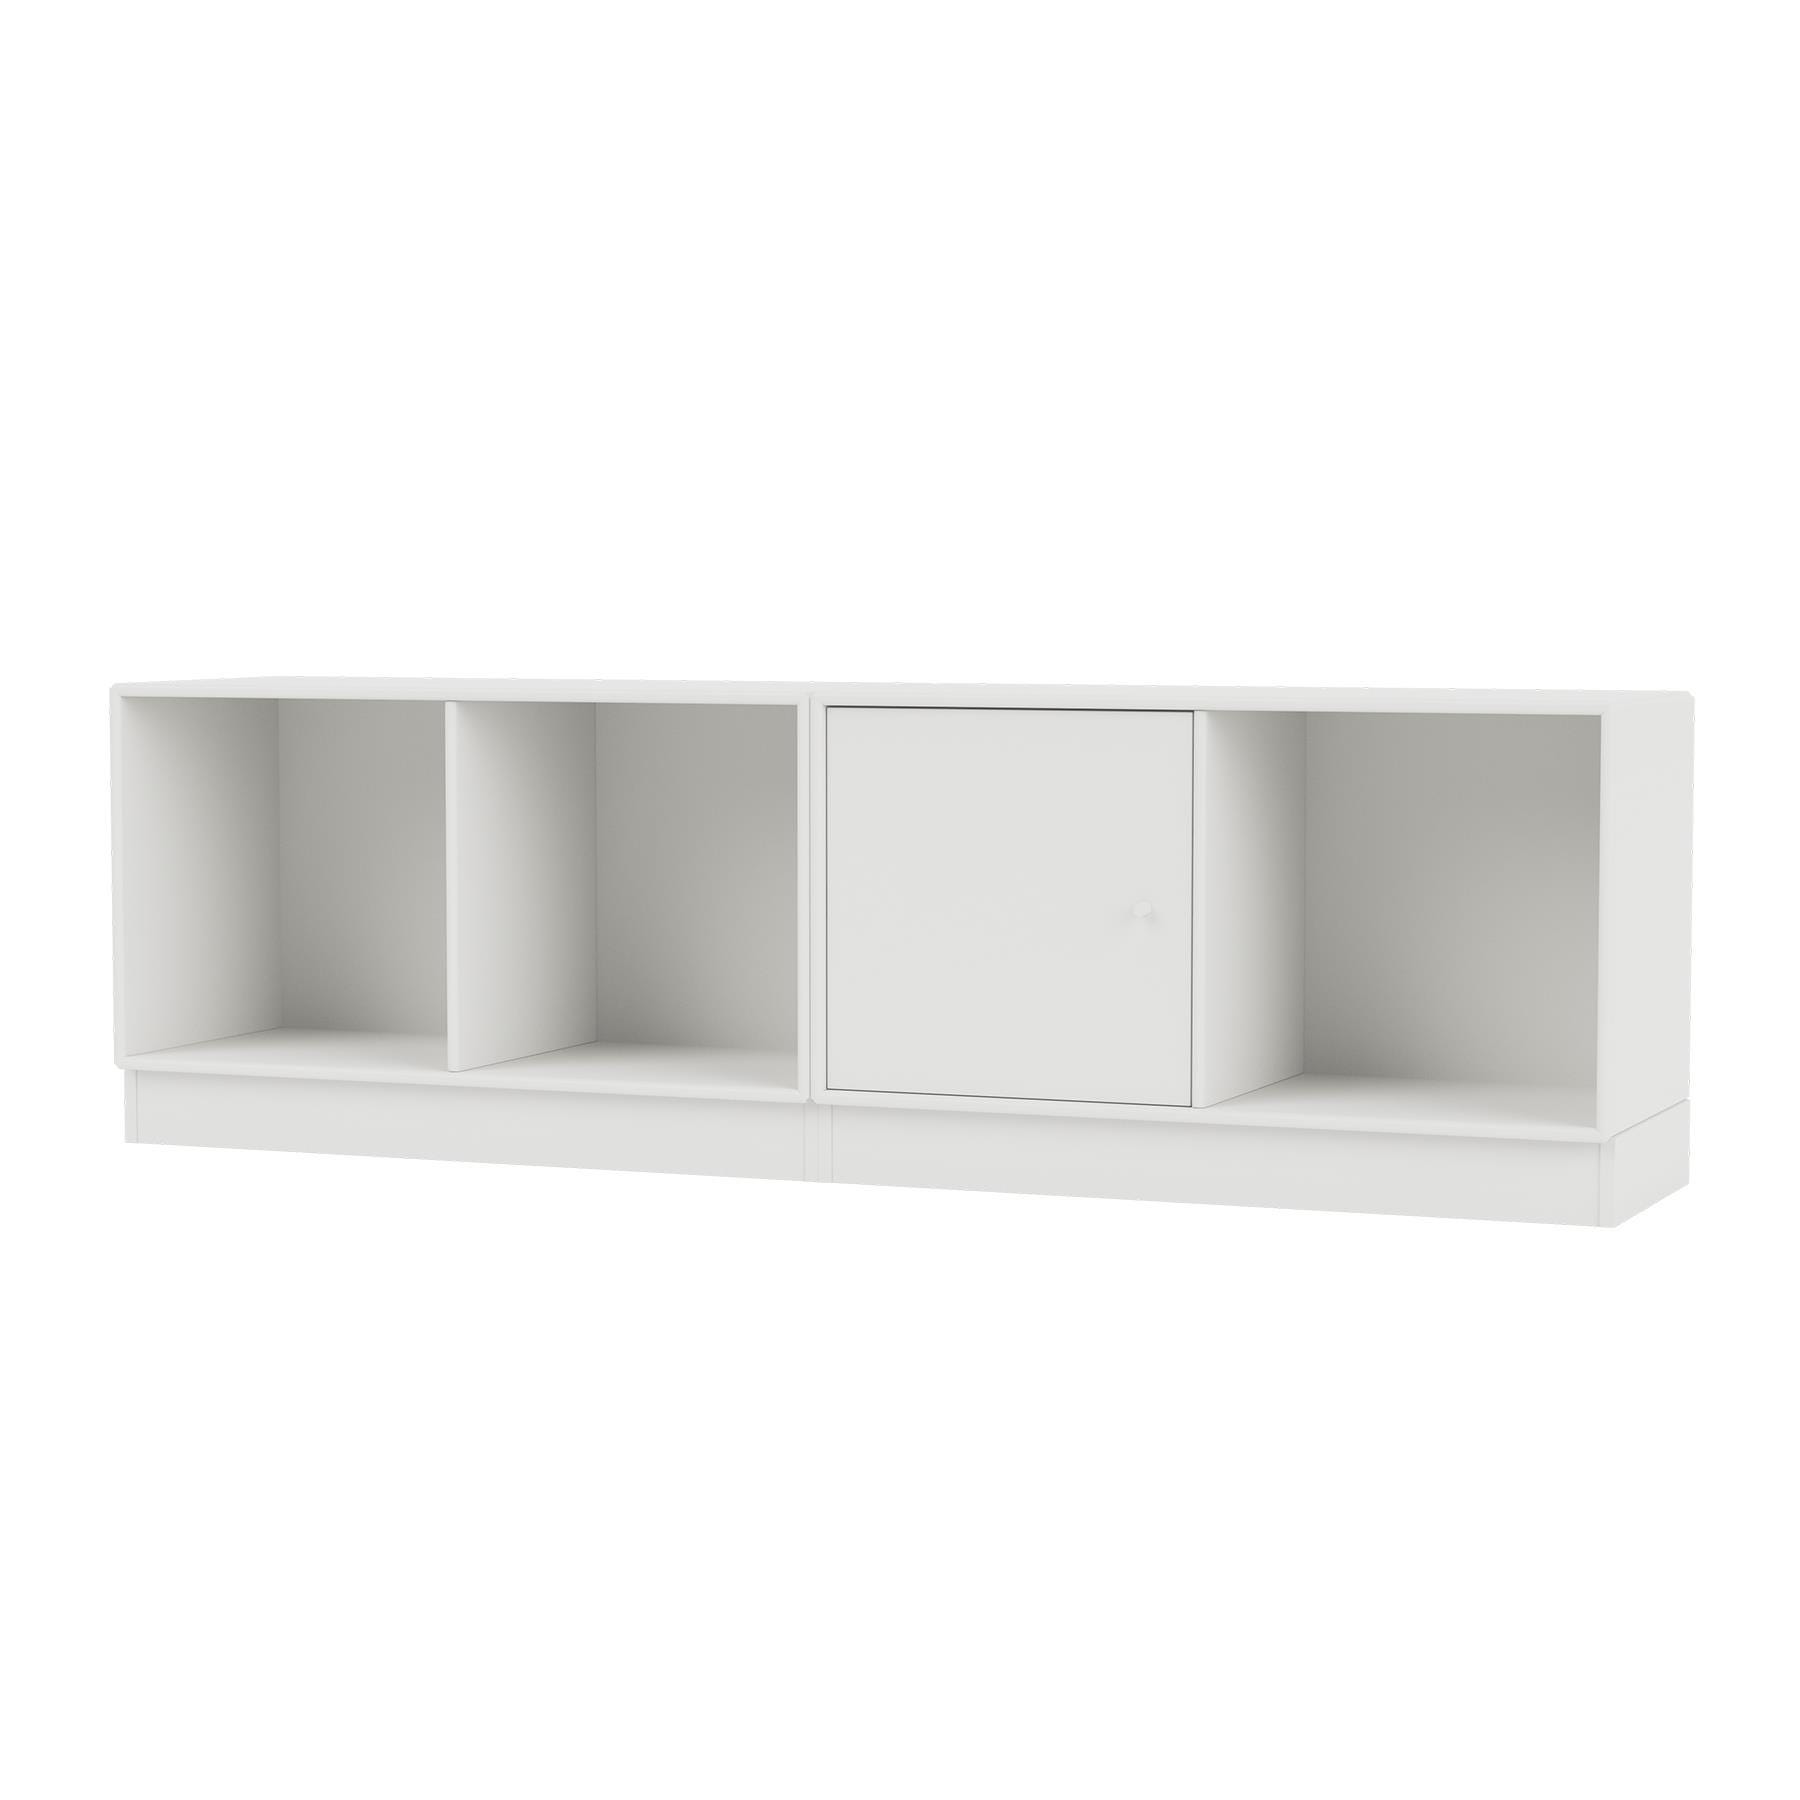 Montana Line Sideboard White Plinth White Designer Furniture From Holloways Of Ludlow